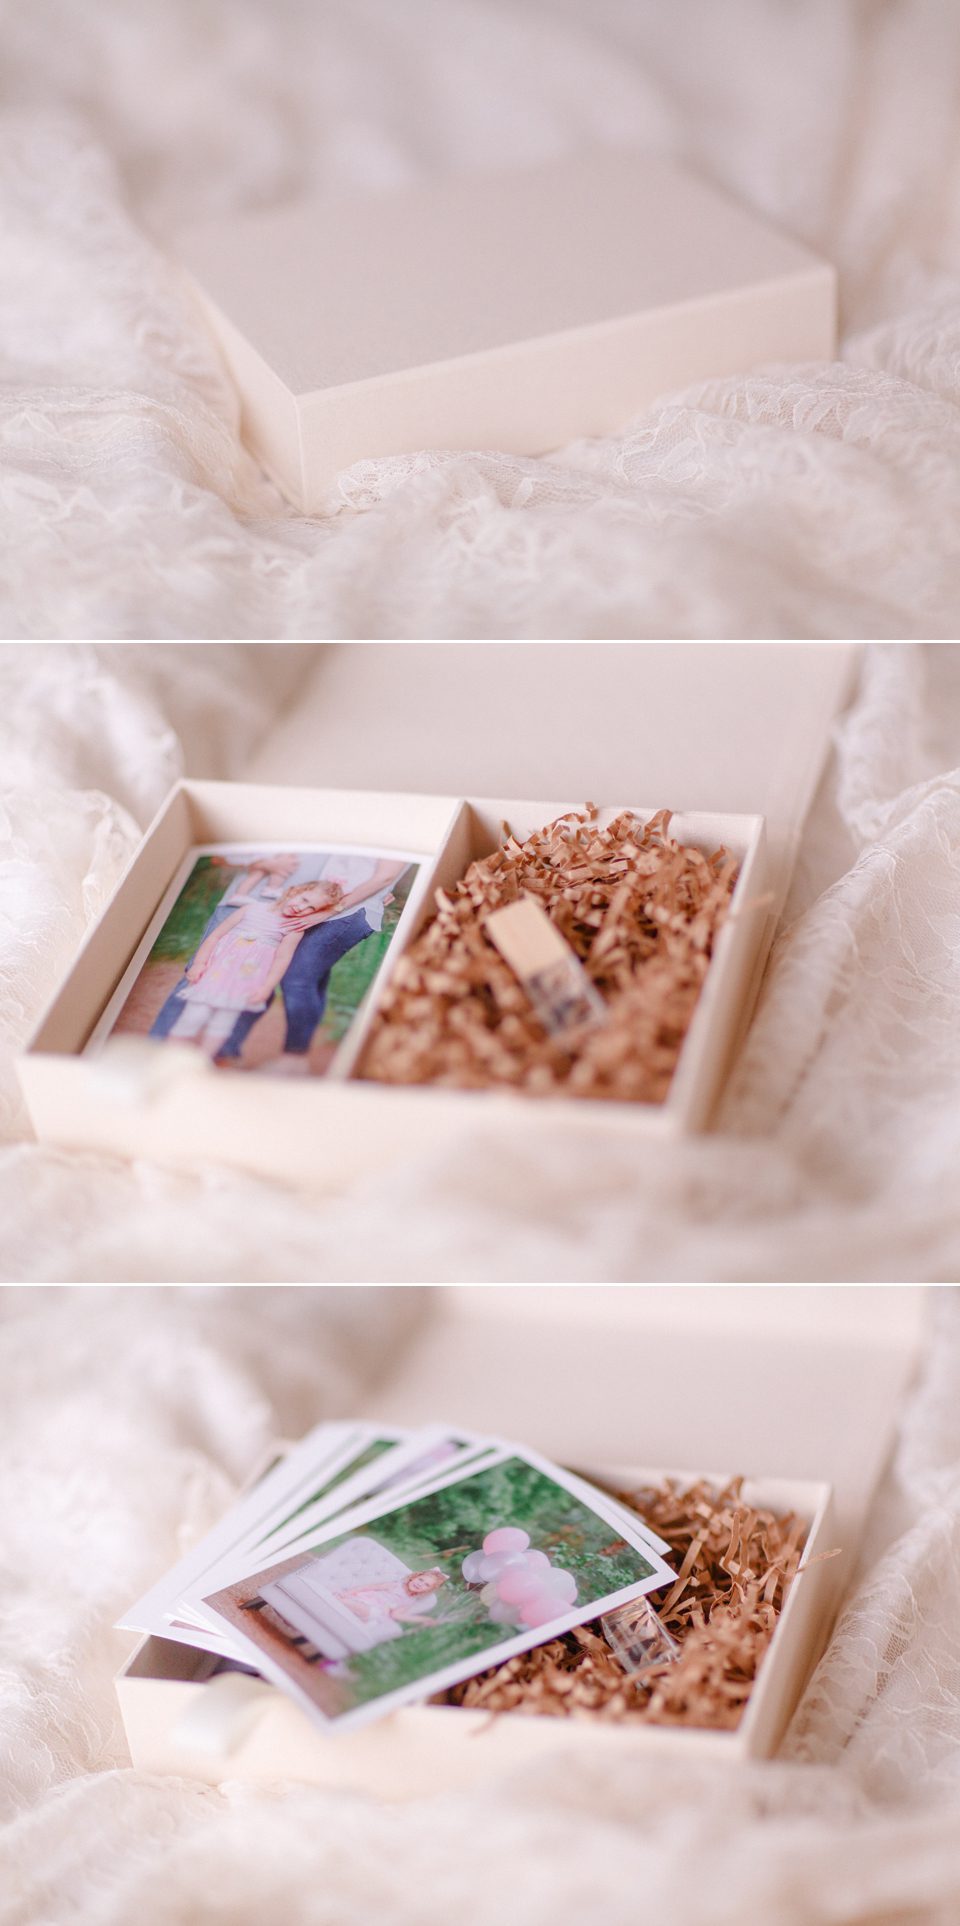 Product shots of loose prints in an heirloom box offered by Athens, GA family photographer.